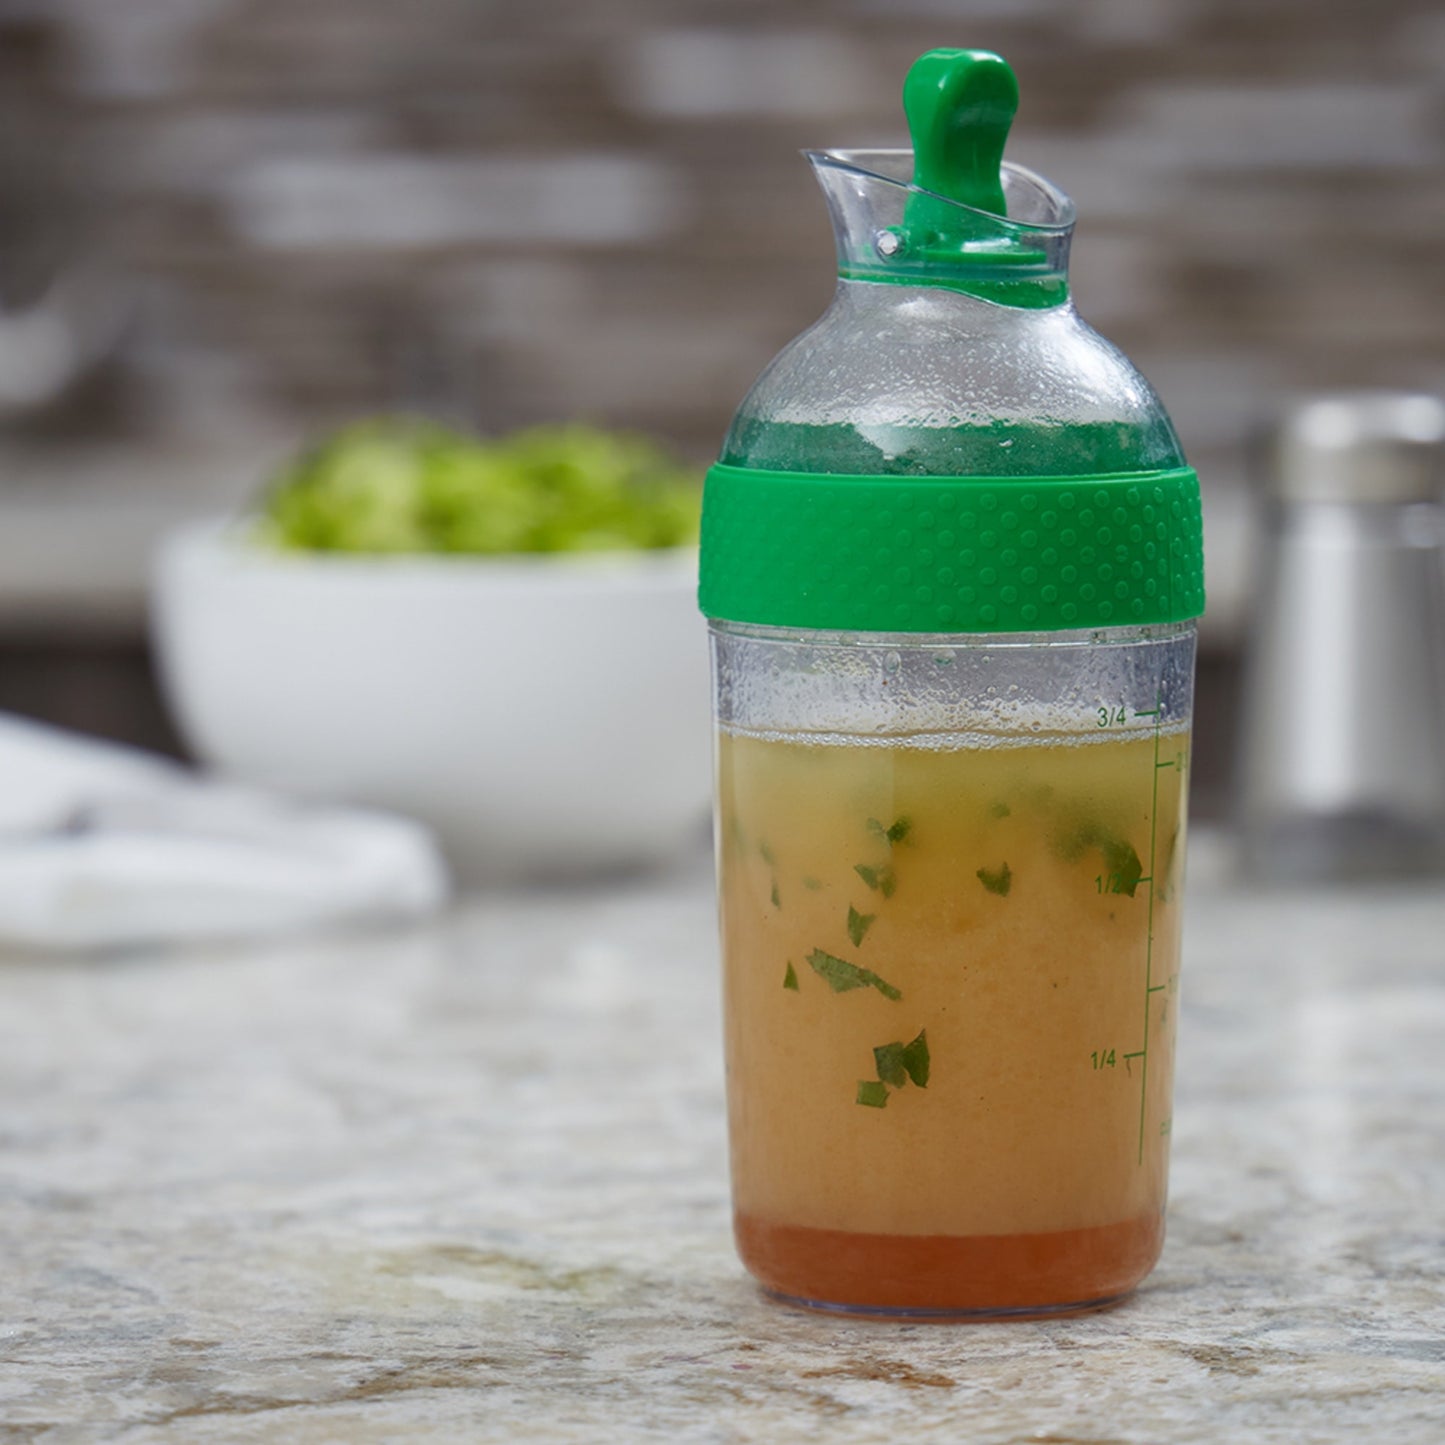 Make Your Own Salad Dressing - Mixing Bottle